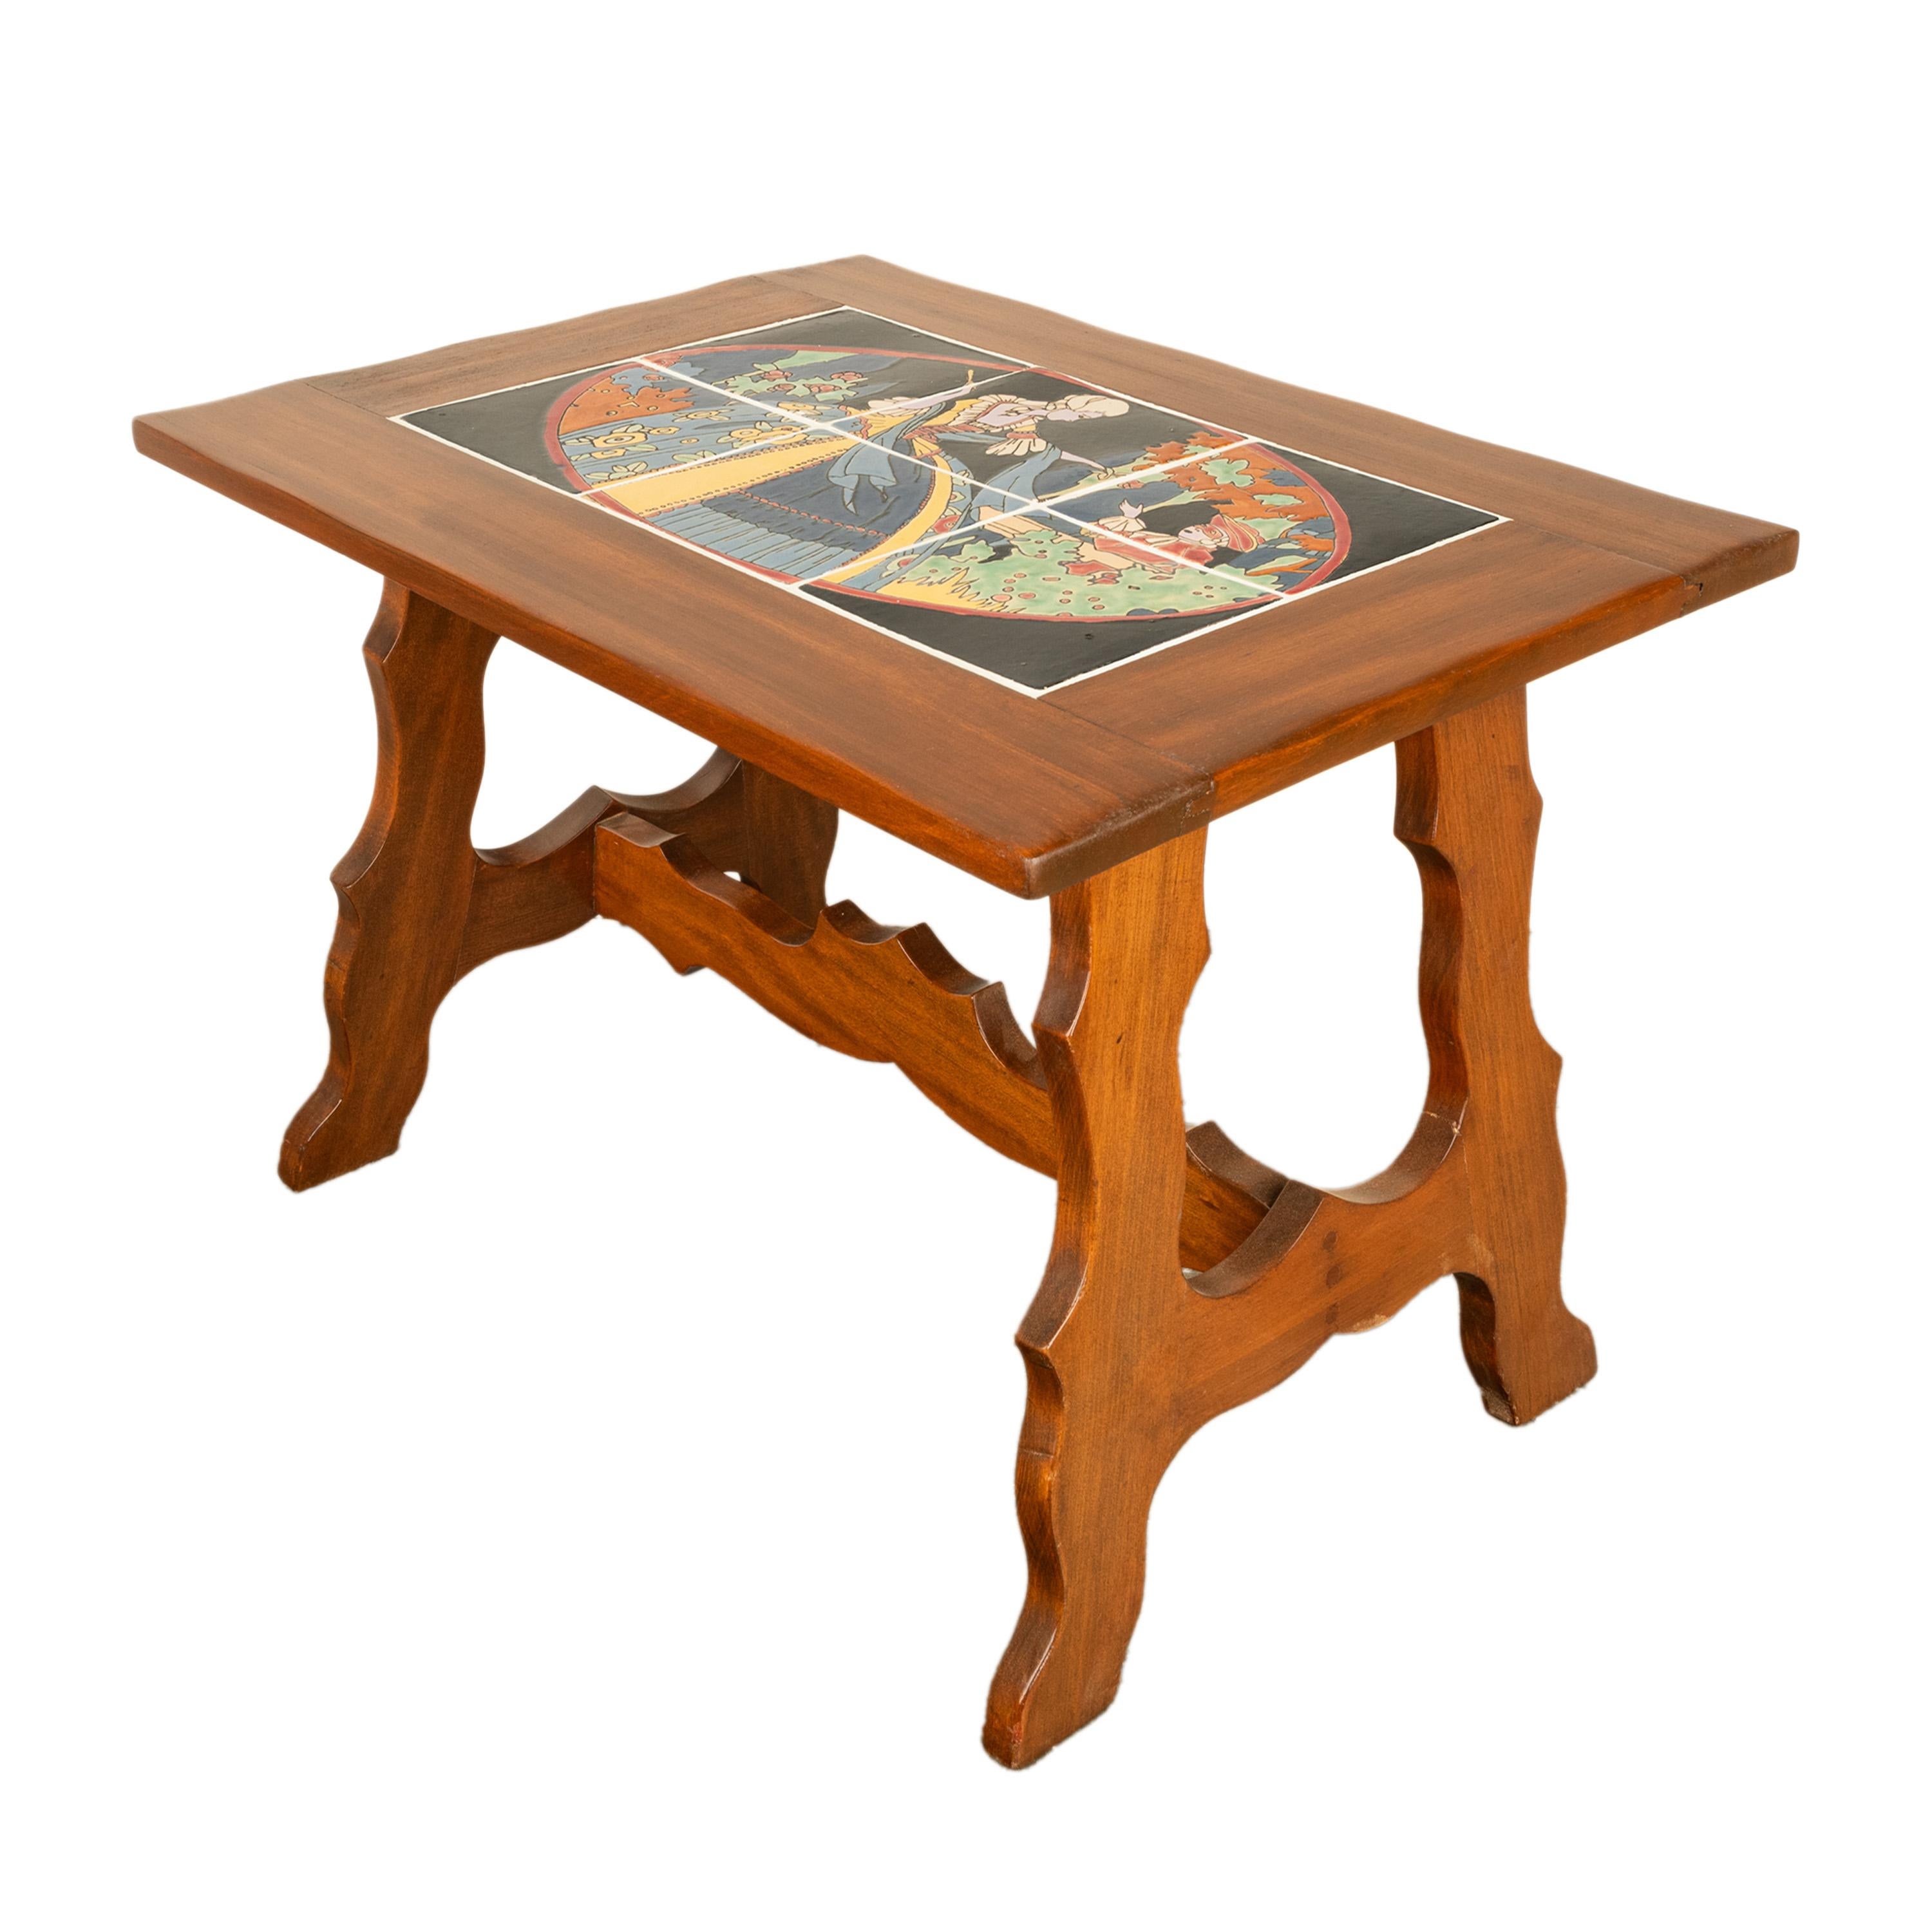 Antique Mission Catalina Monterrey California Tile Top Walnut Coffee Table 1930 For Sale 3